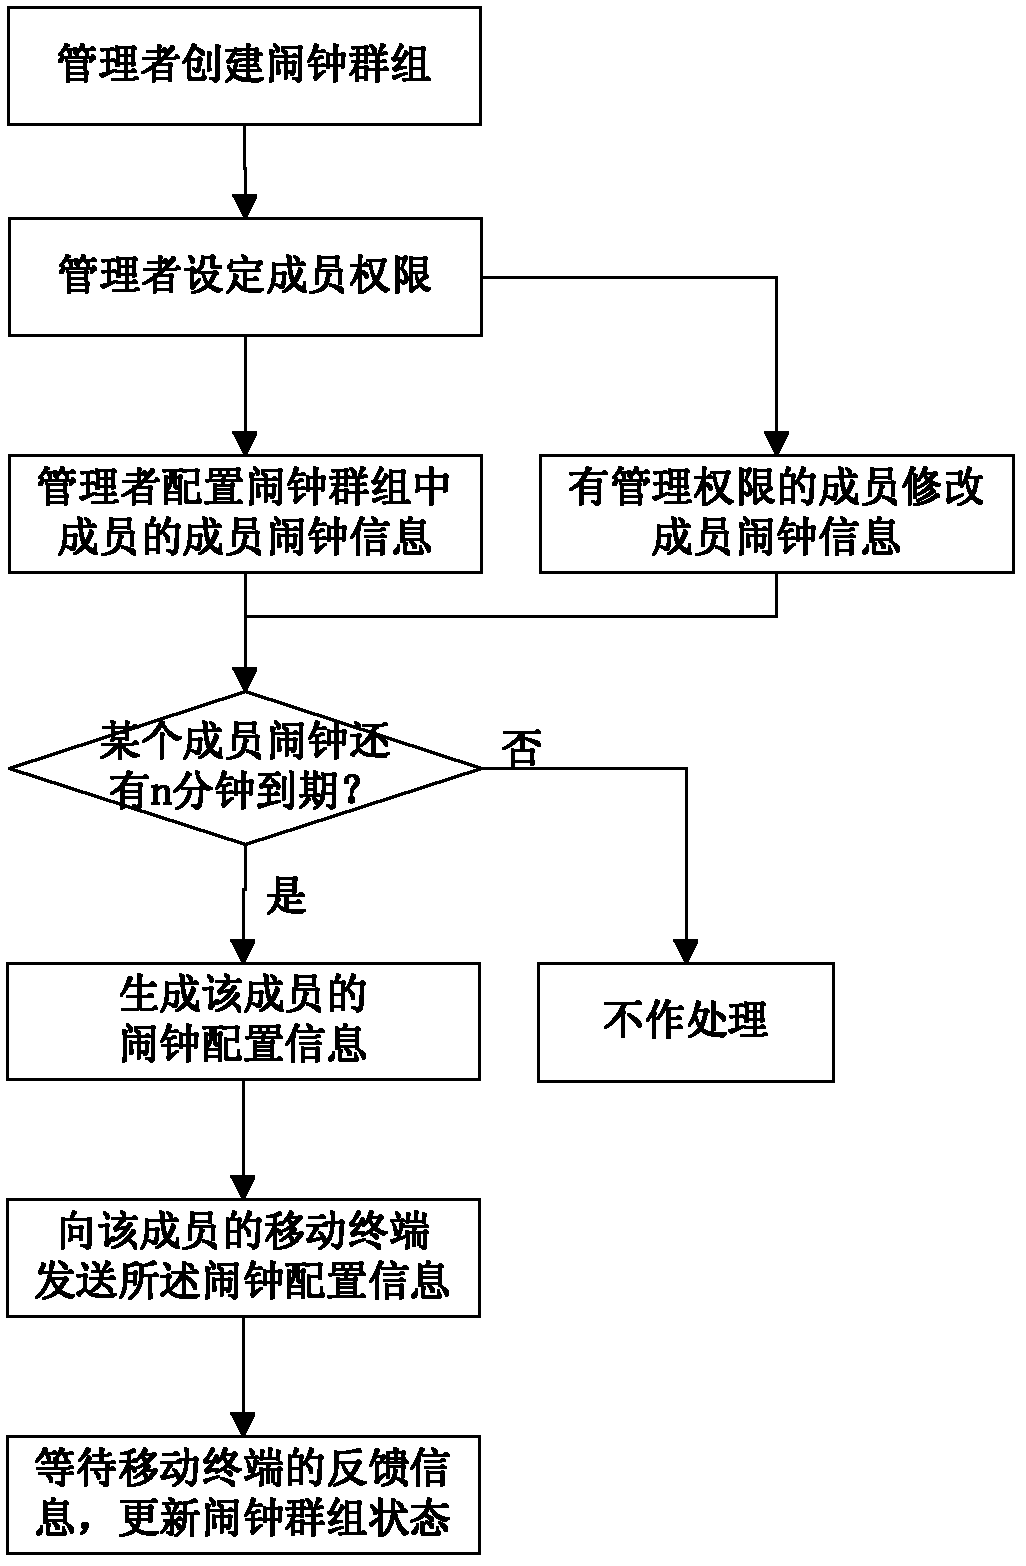 Method and system of alarm clock cloud service